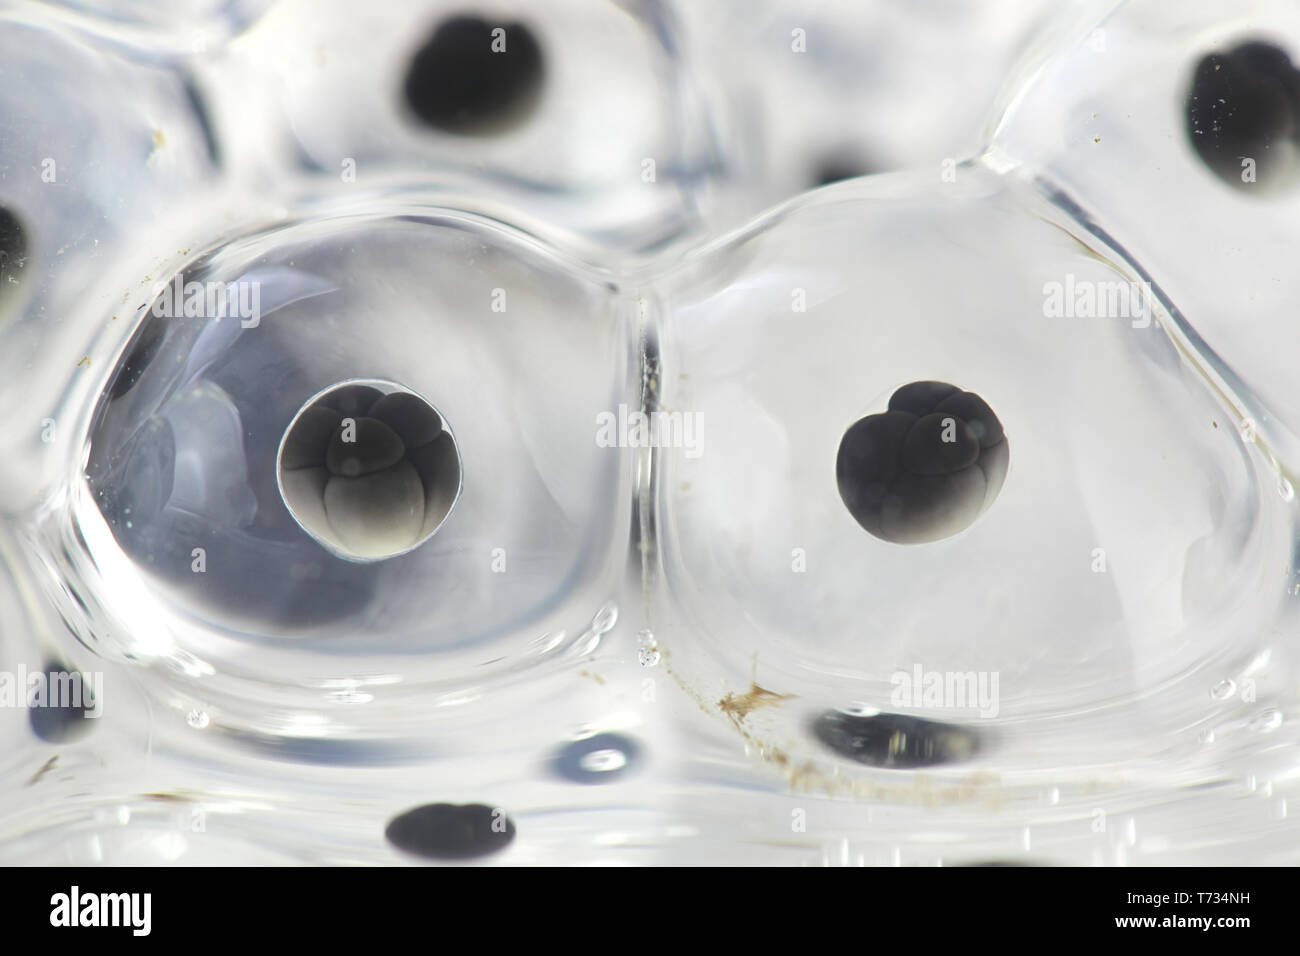 Mitosis or cell division of frog spawn Stock Photo